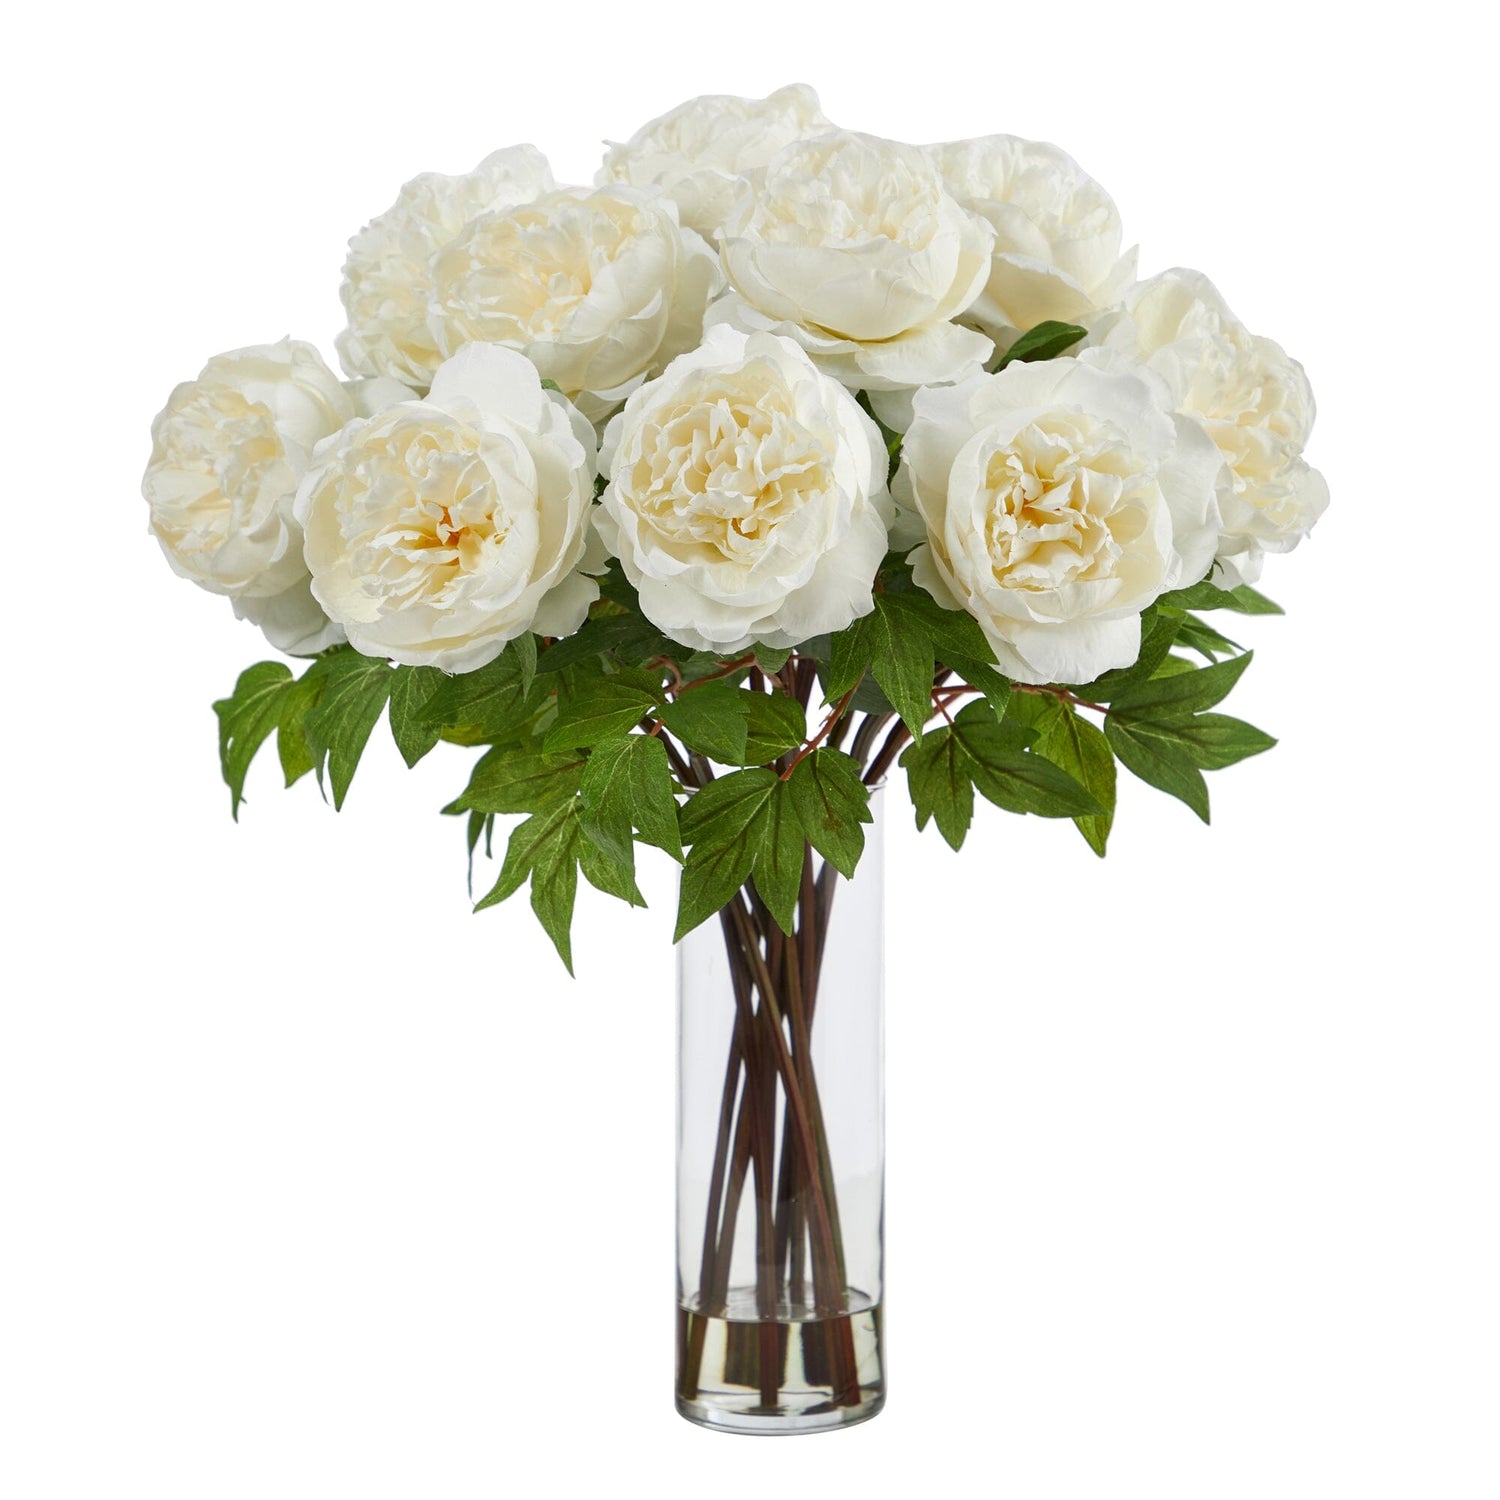 22” Artificial Peony Arrangement with Cylinder Glass Vase